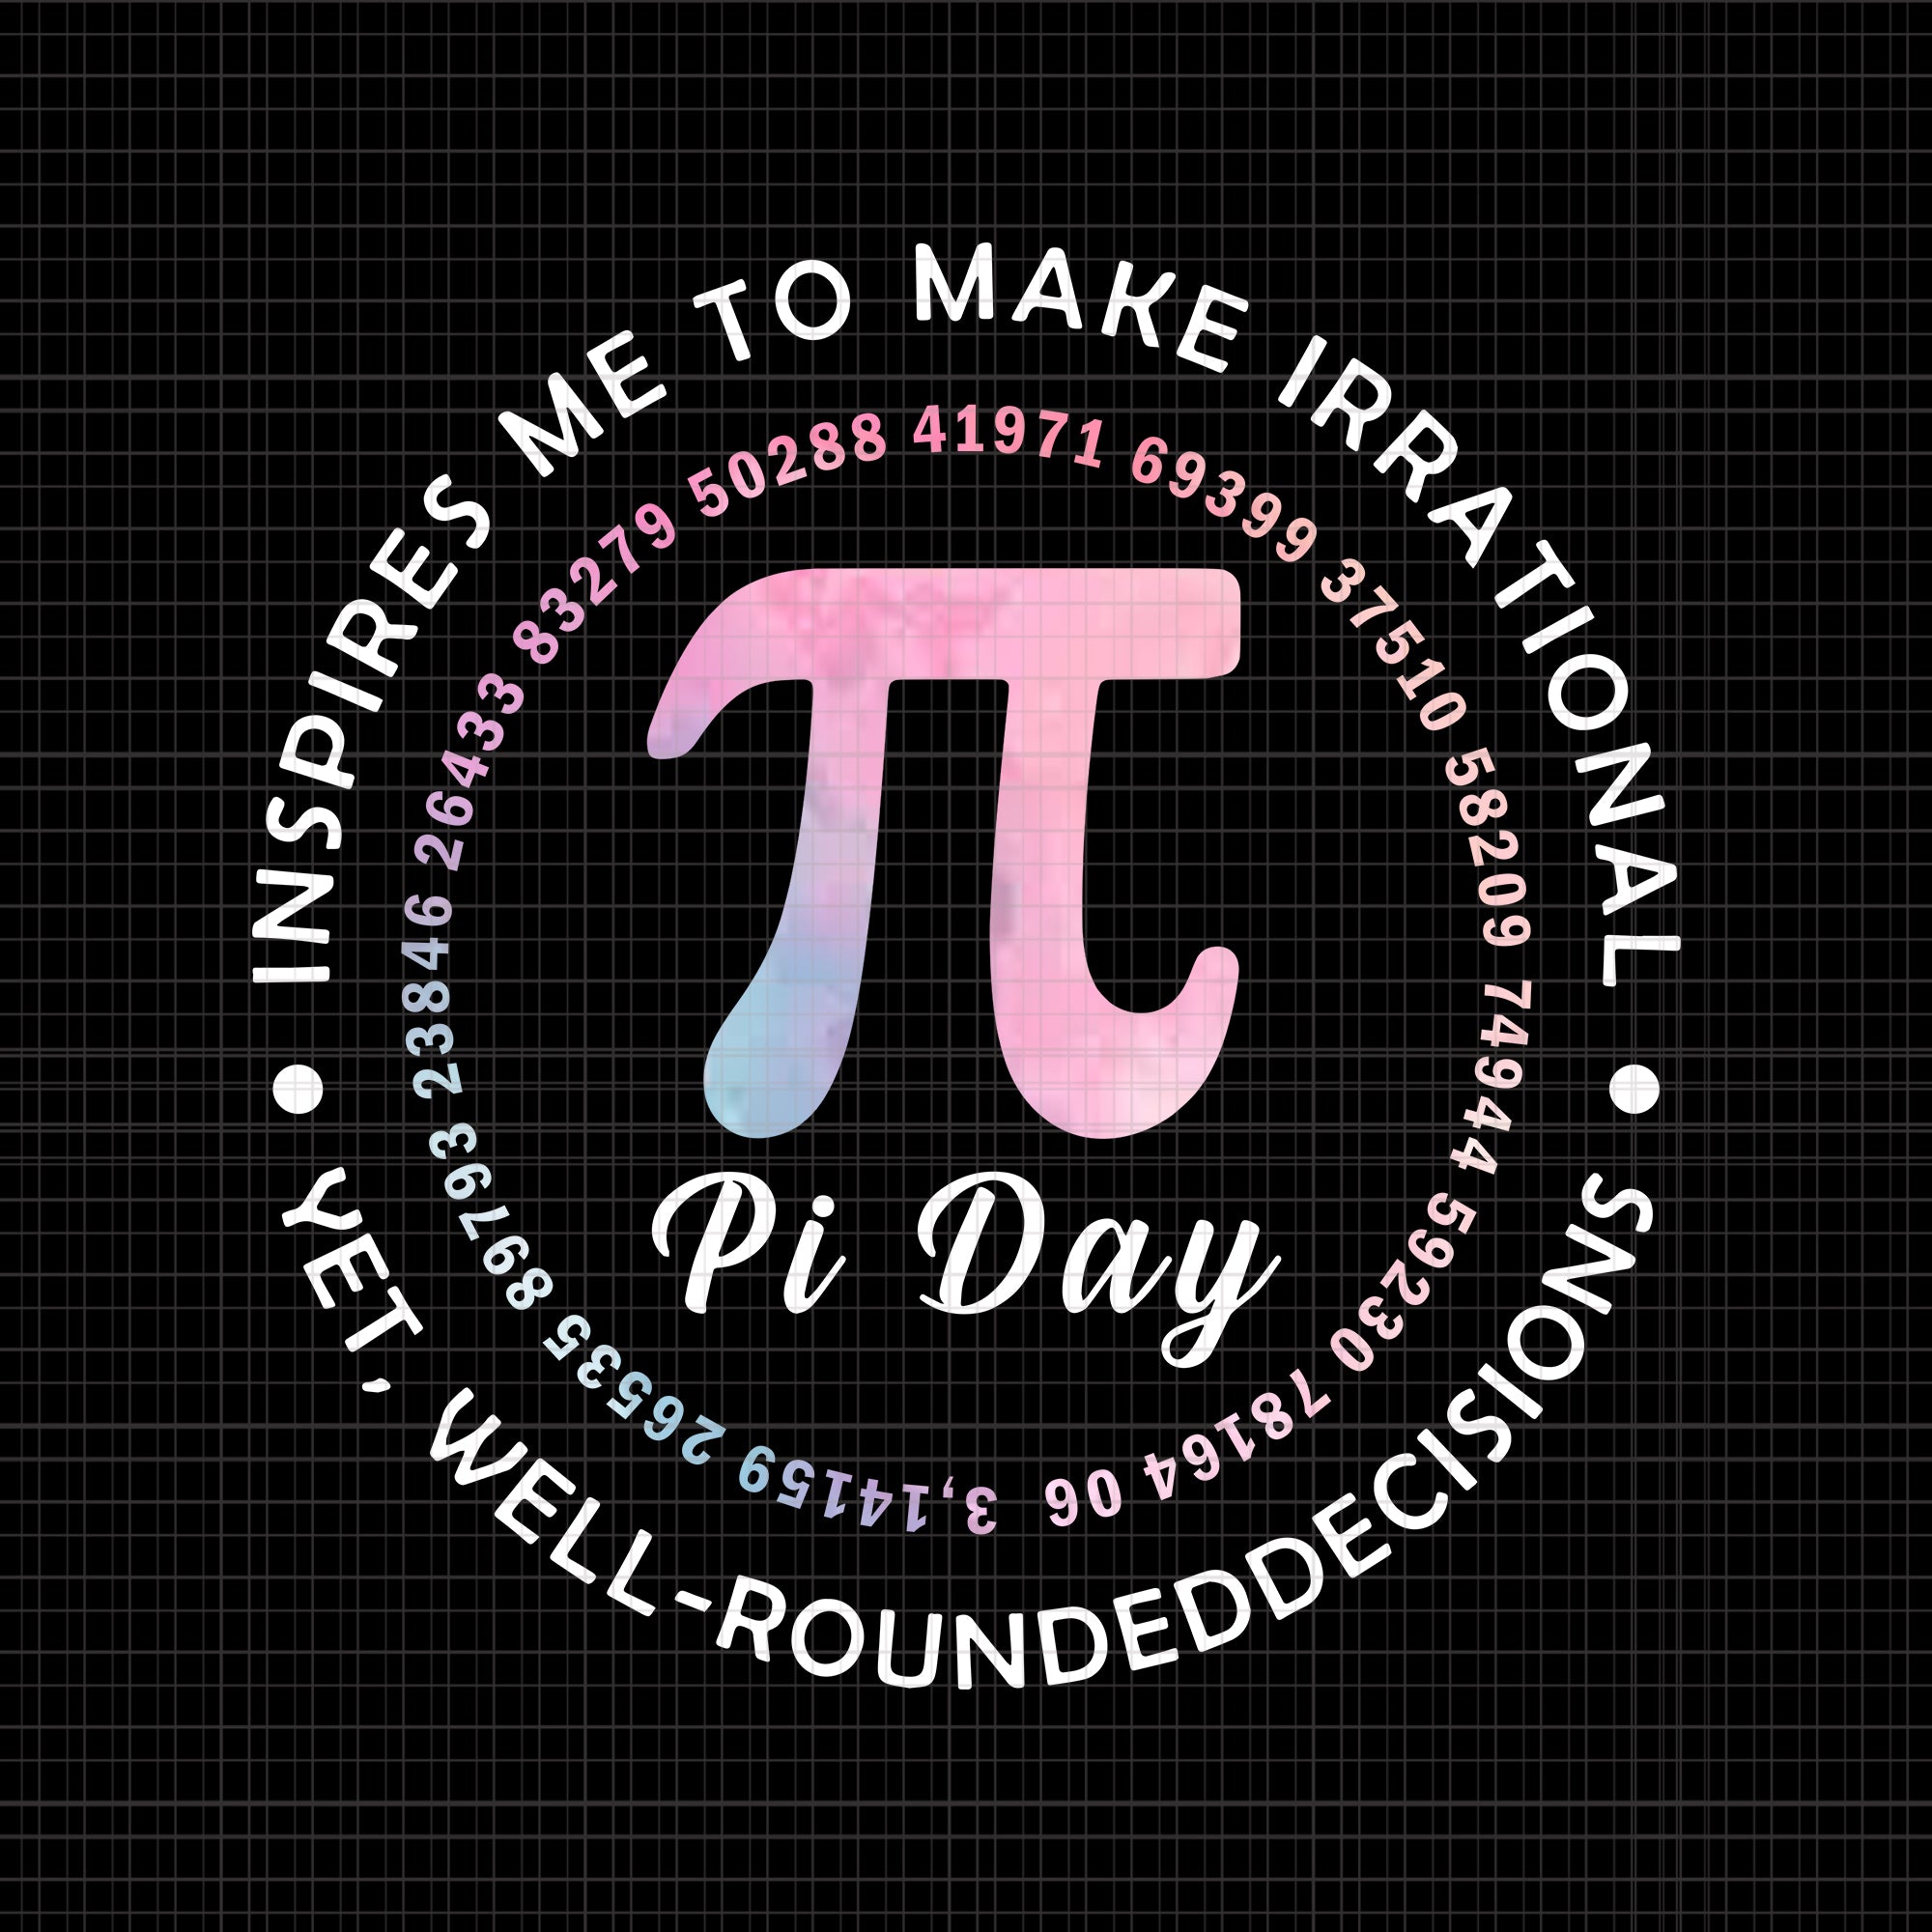 Pi day png,pi day vector, piday 3.14 png, 3.14 png, 3,14 vector, 3,14 design,pi day inspires me to make irrational decisions 3.14 math